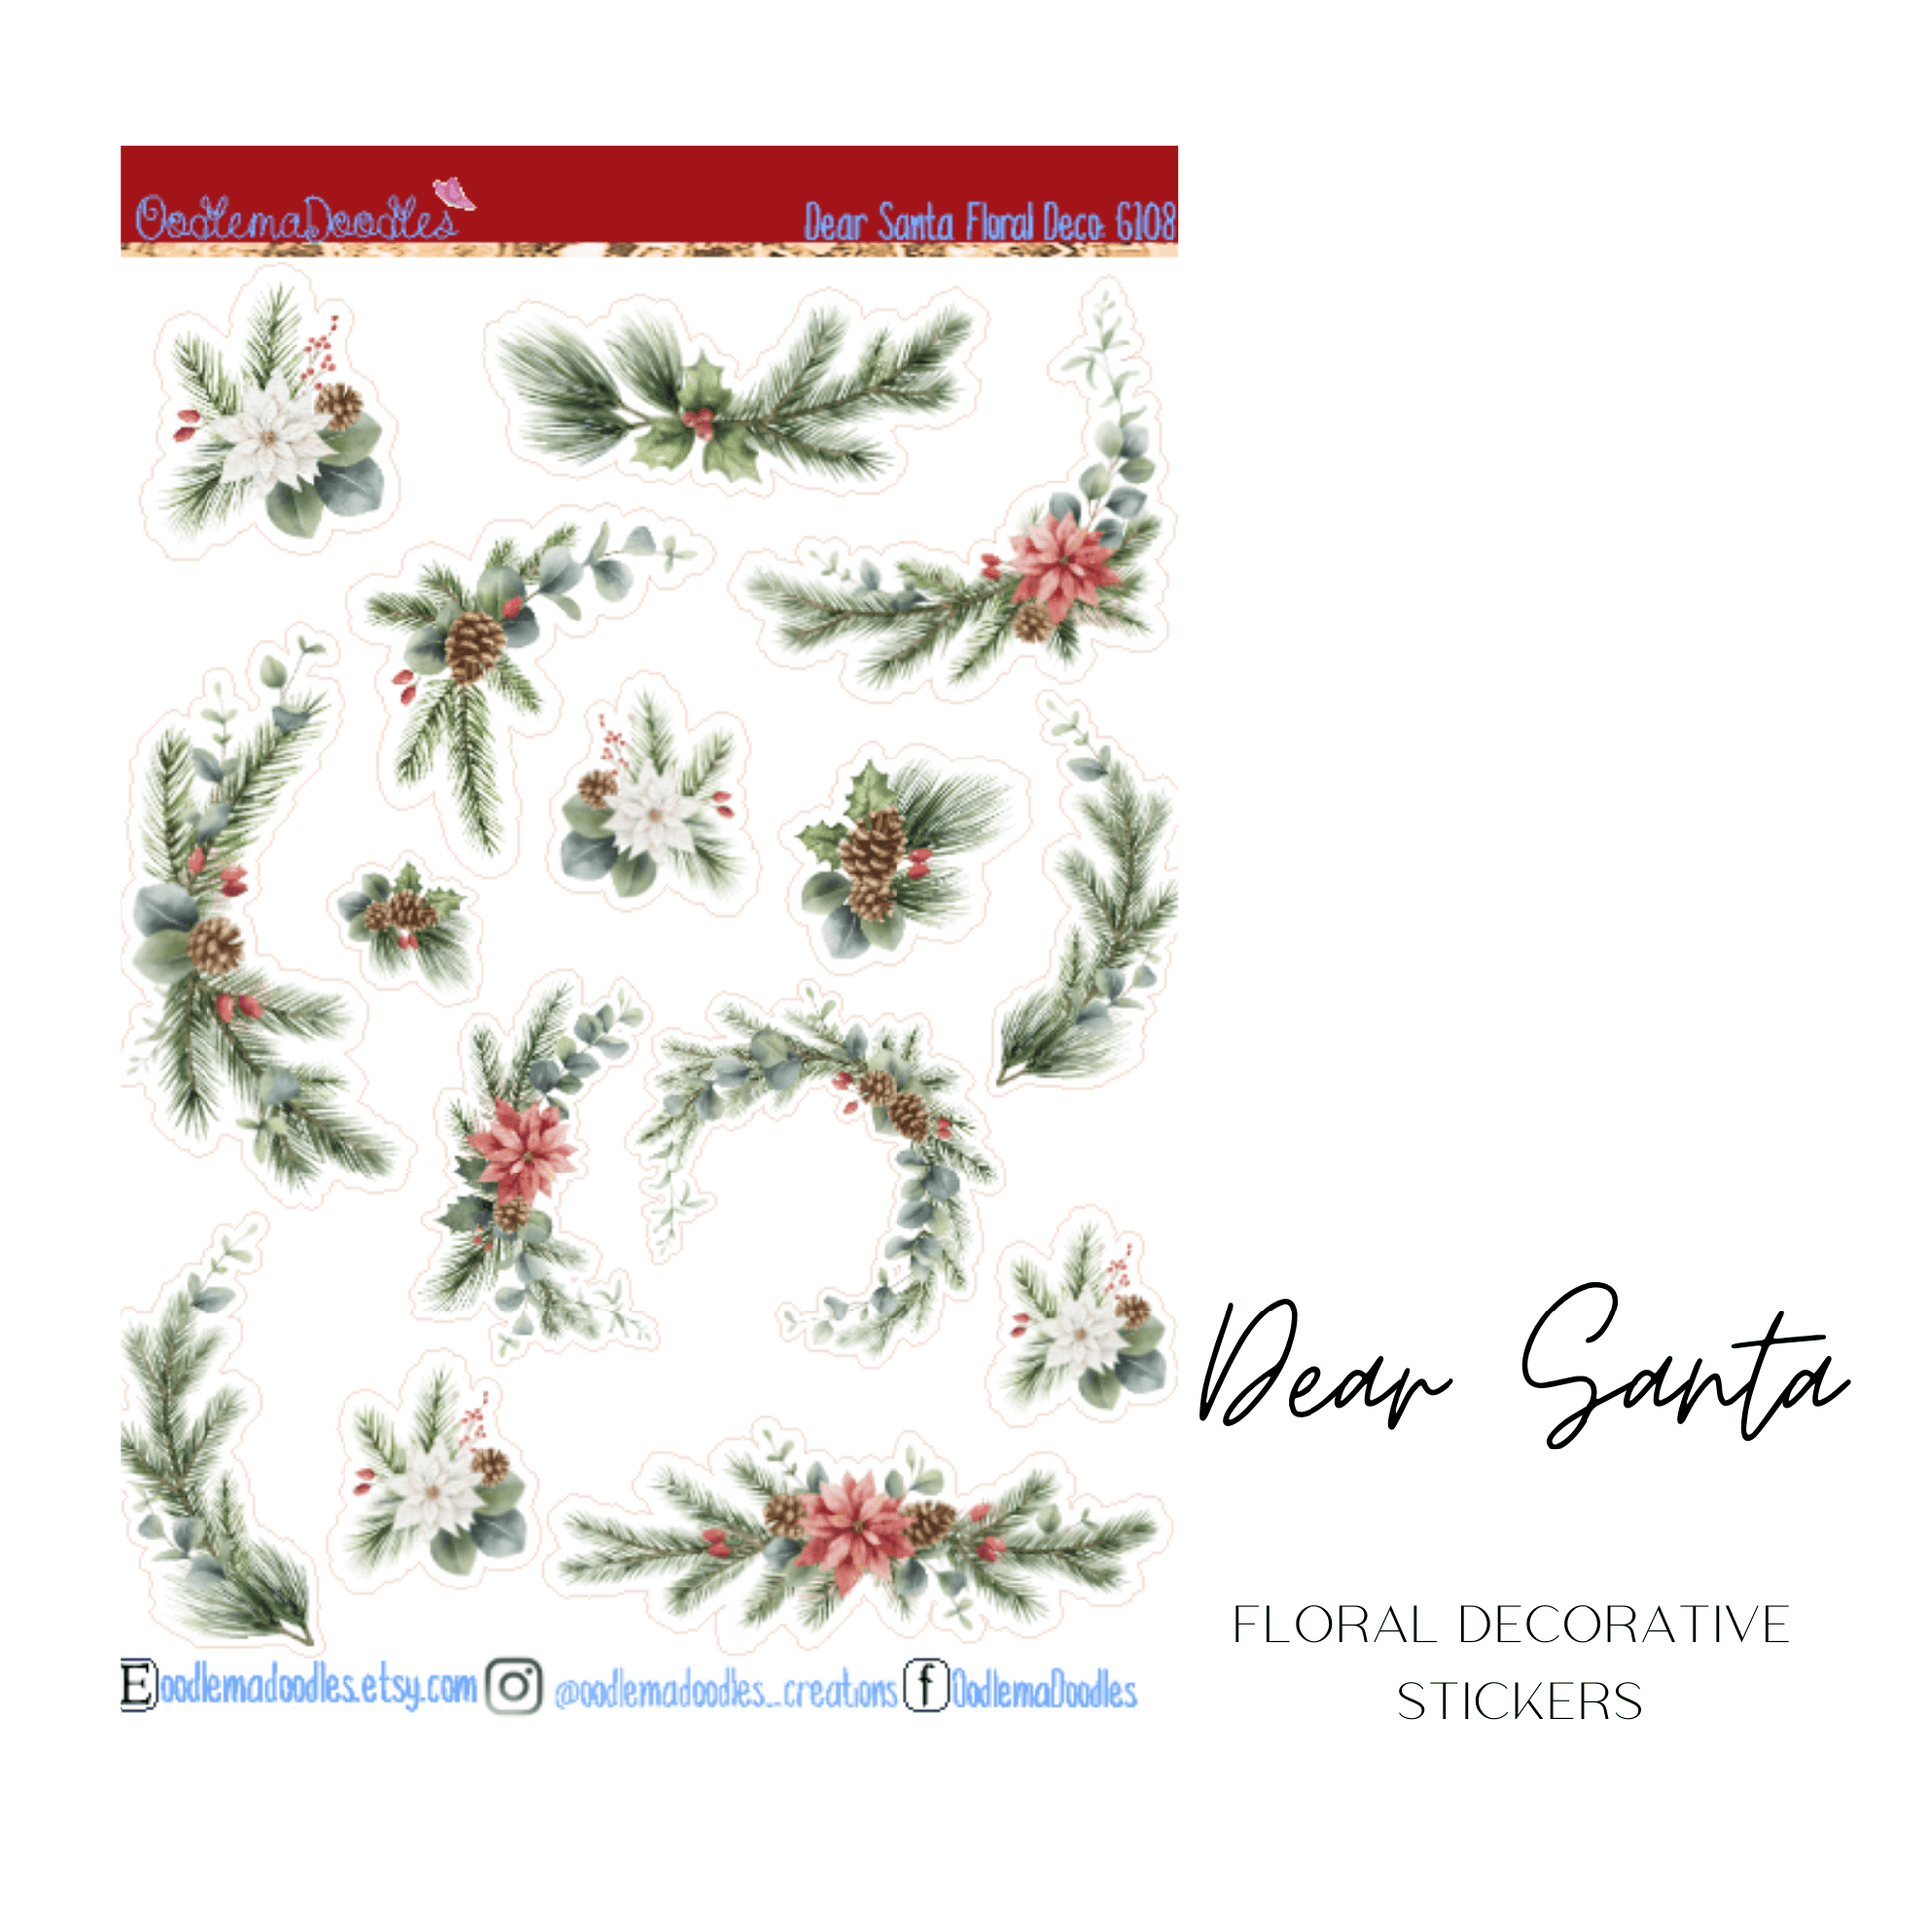 Dear Santa Floral Decorative Stickers - oodlemadoodles